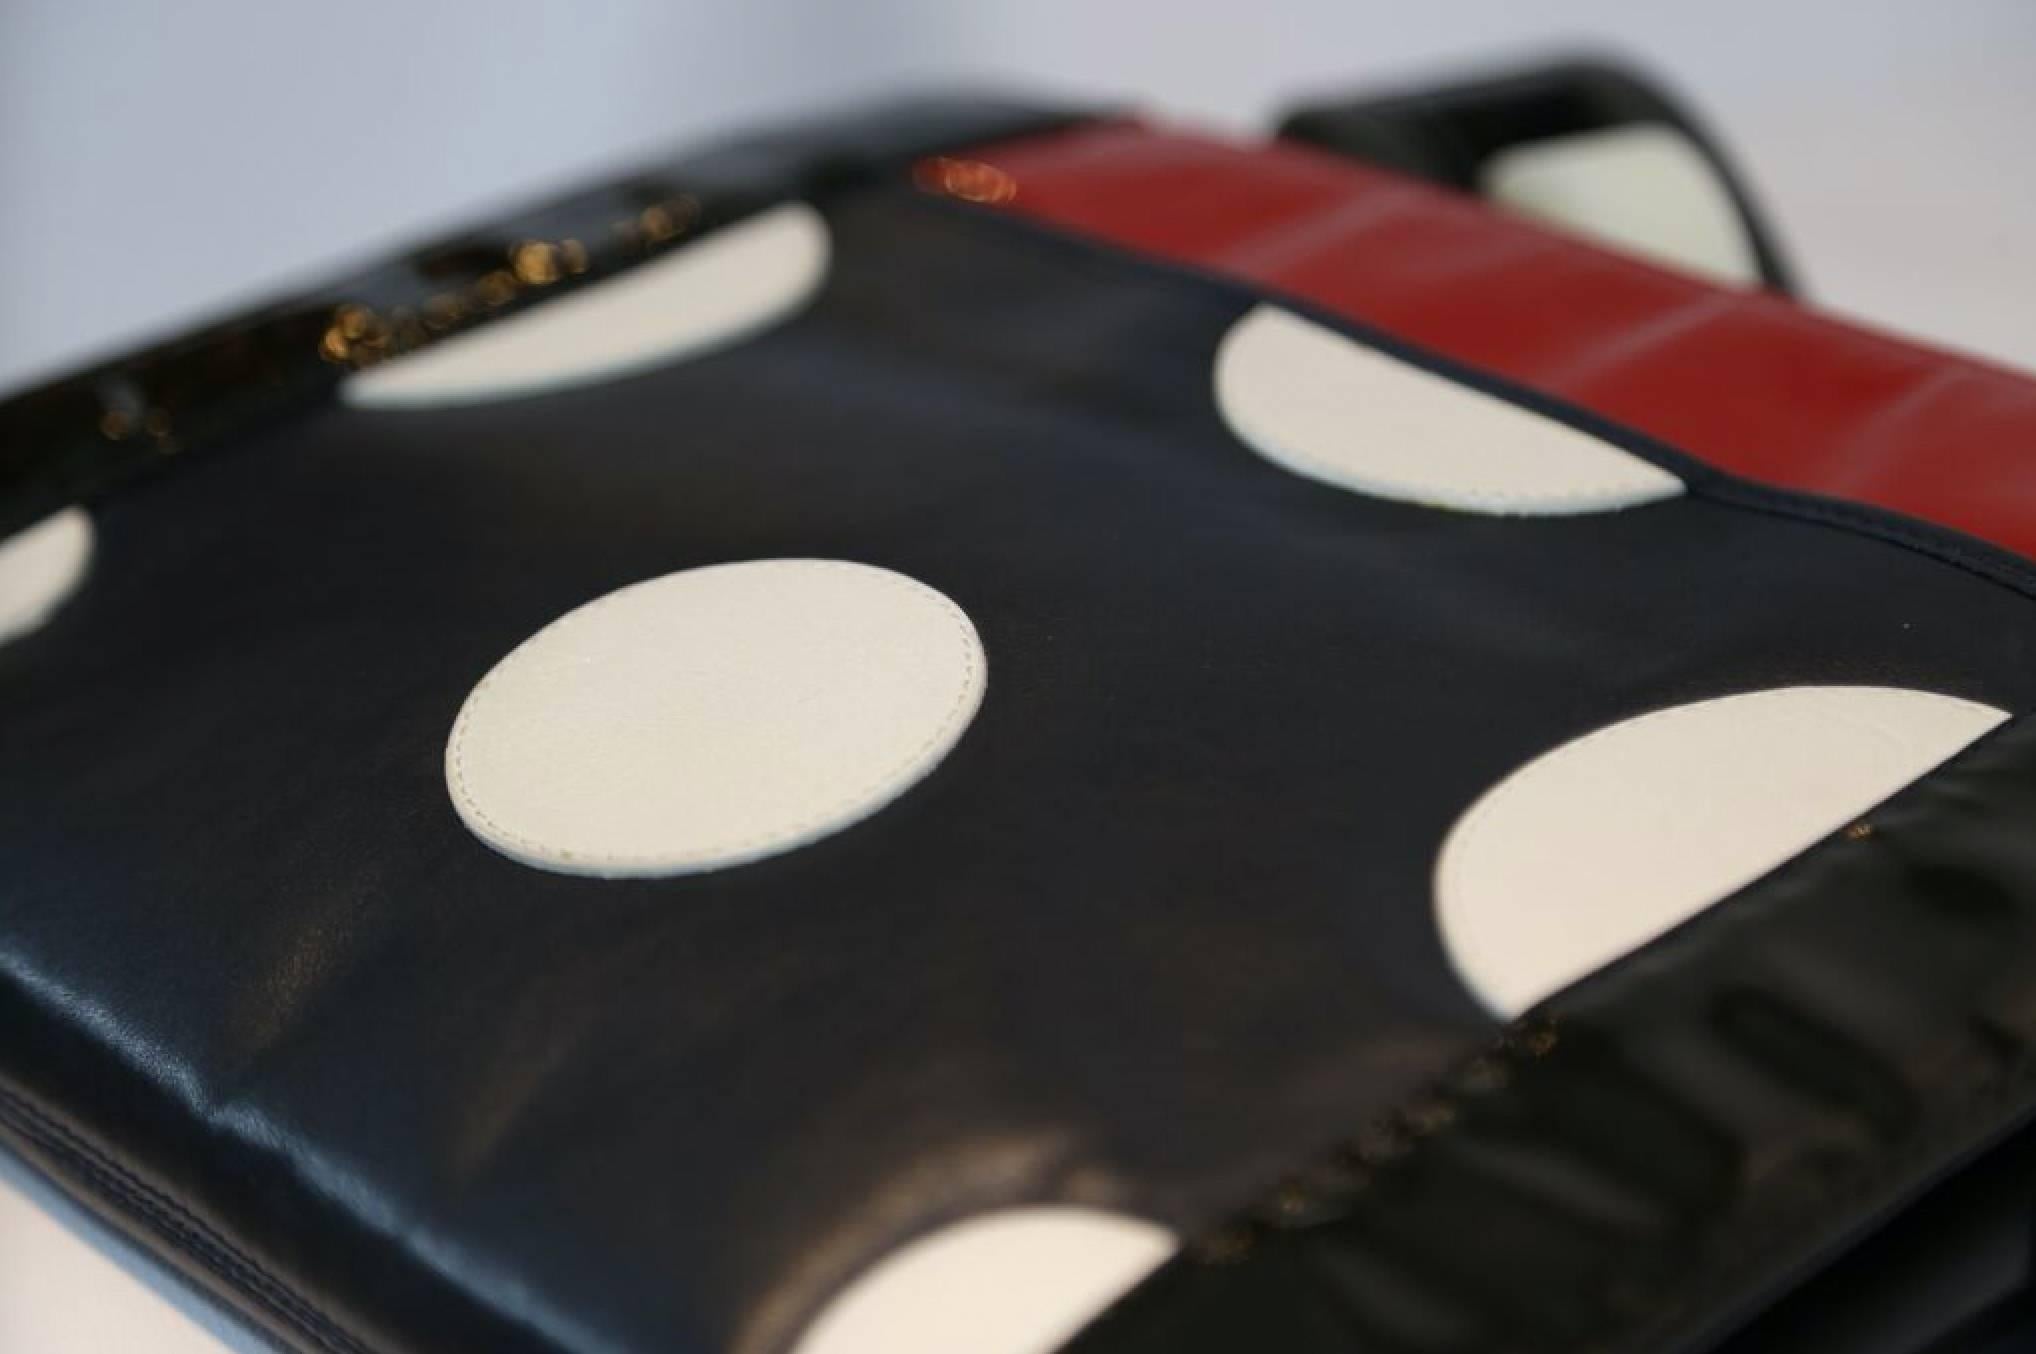 Fendi black, red, and white polka dot clutch. Matte leather with patent leather edges and zip enclosure. 